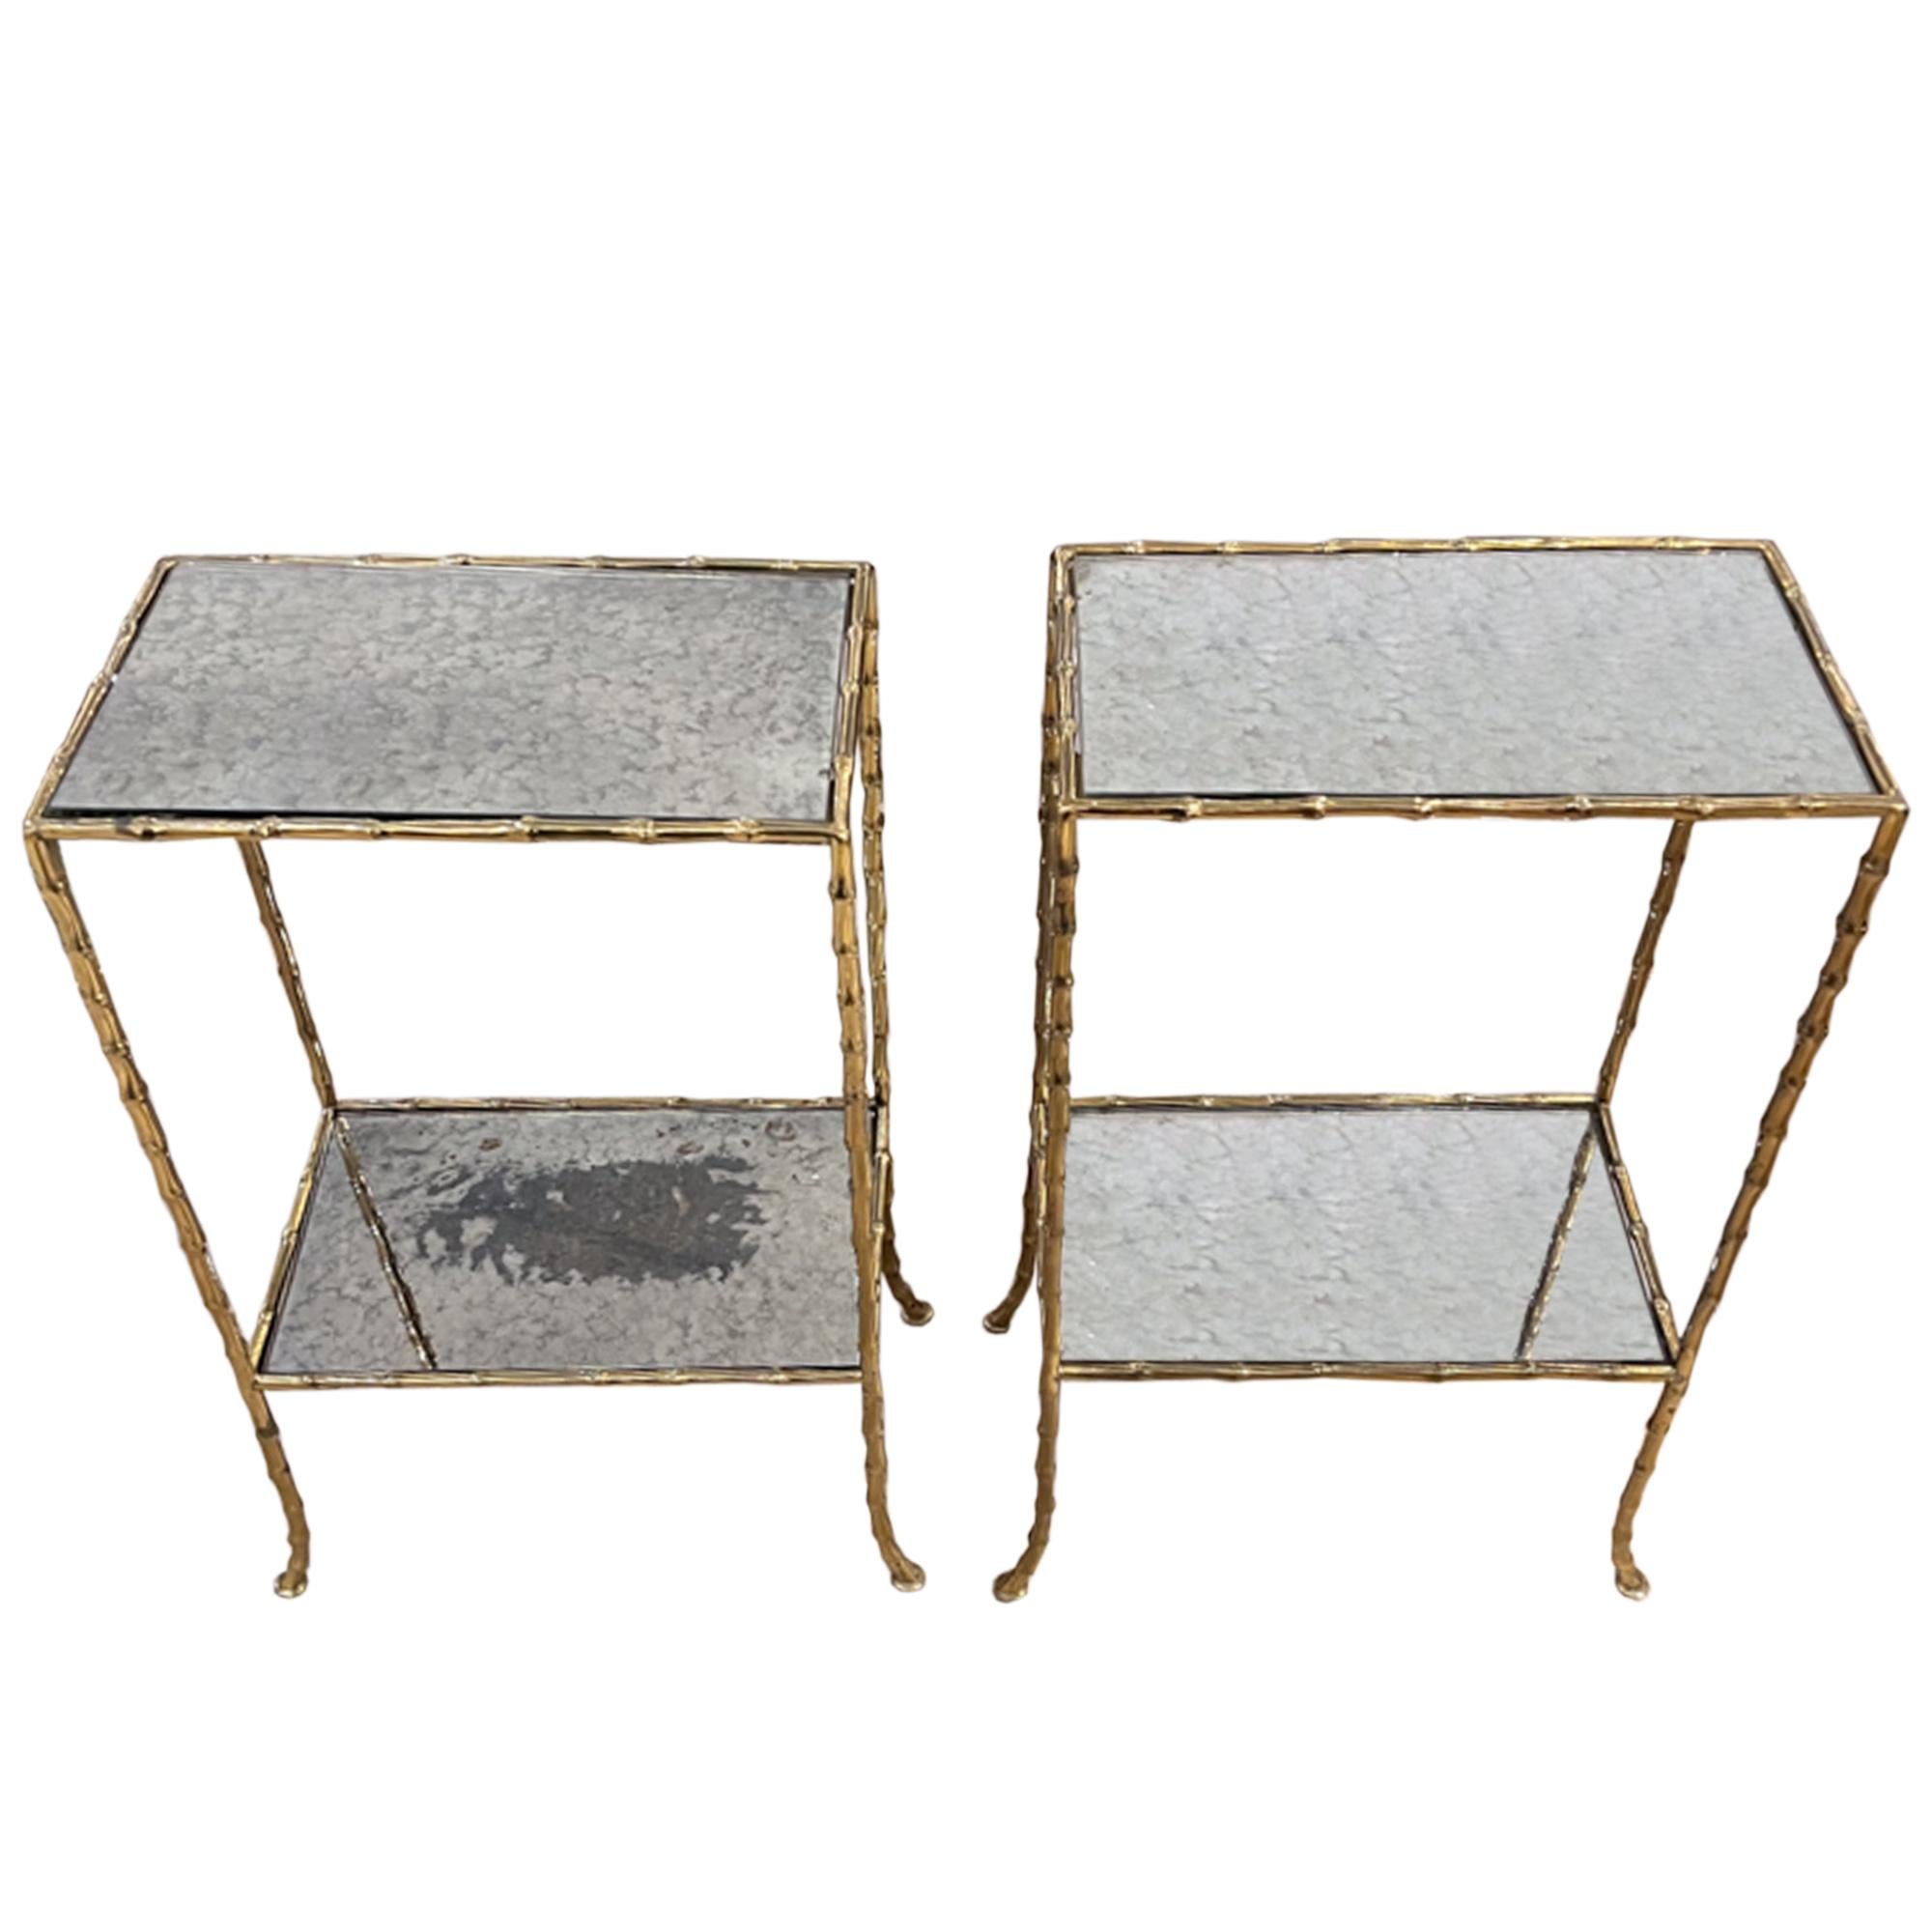 A gorgeous pair of very nice quality French 1960s side tables made from brass and eglomise glass.

A really elegant design with lovely turned out legs - delicate but sturdy!

These tables are perfect for a smaller reception room, bedroom or study.